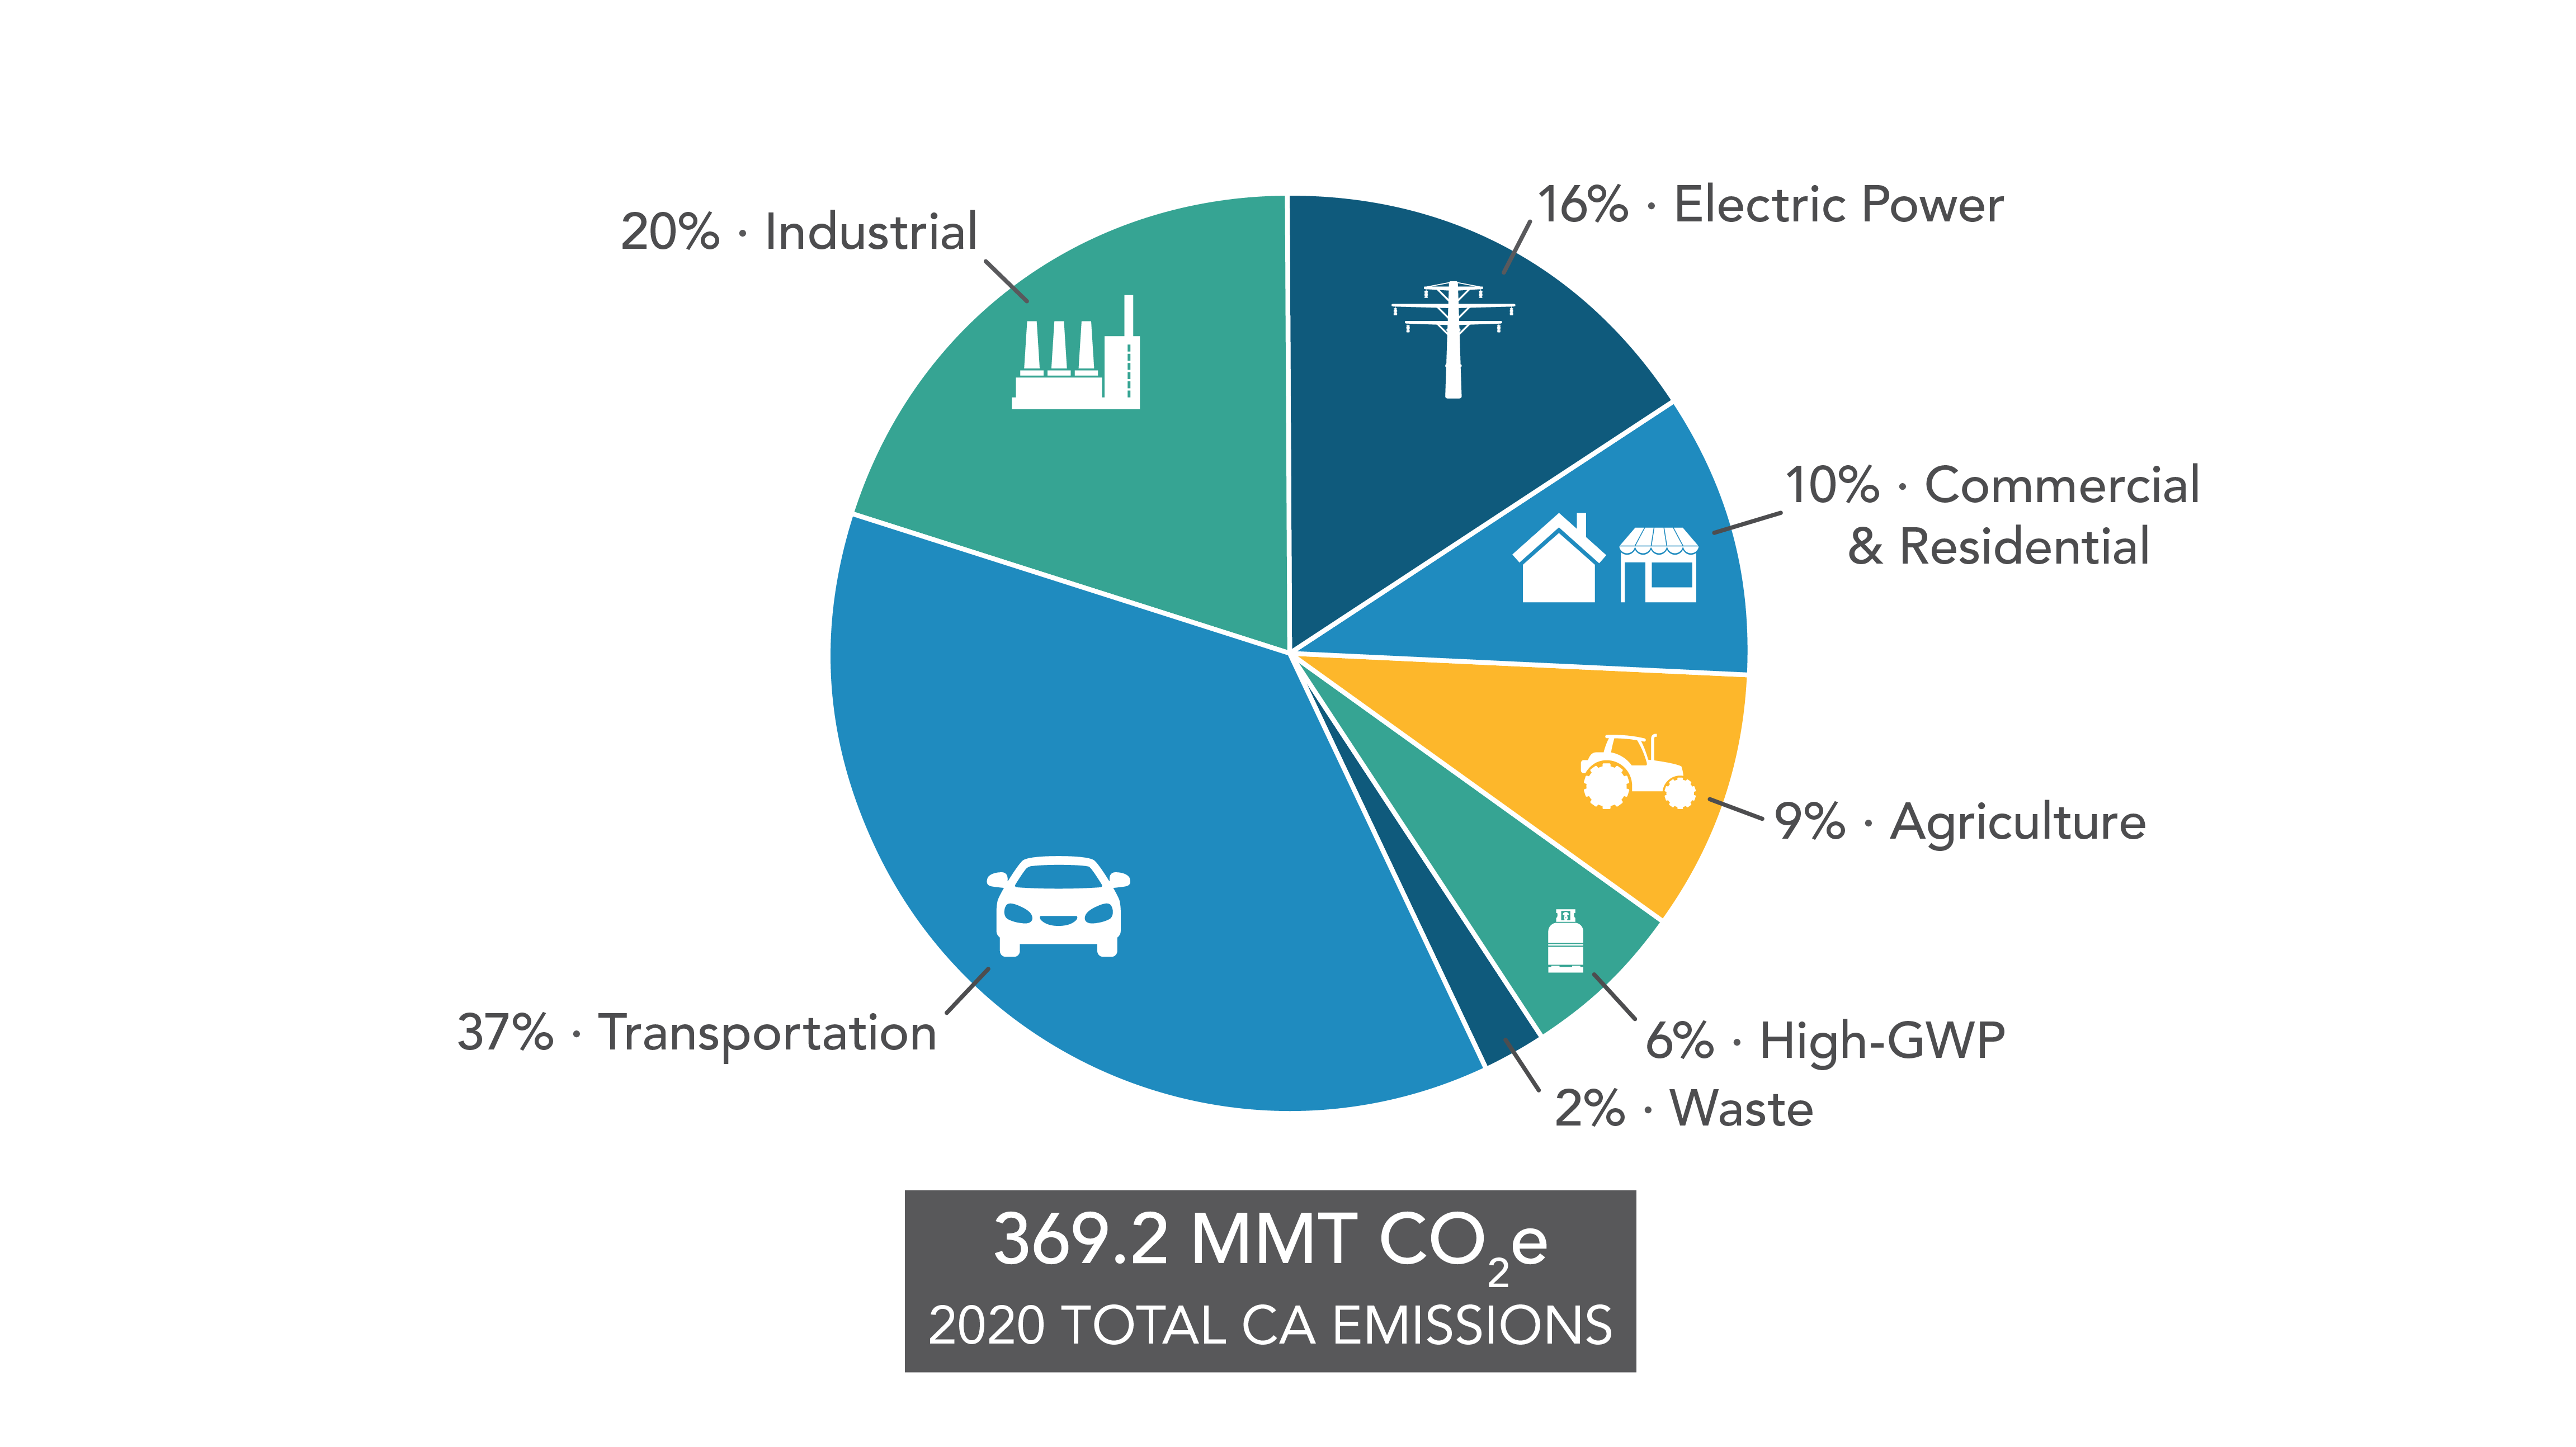 Greenhouse gas emissions for the year 2020 organized by scoping plan sector